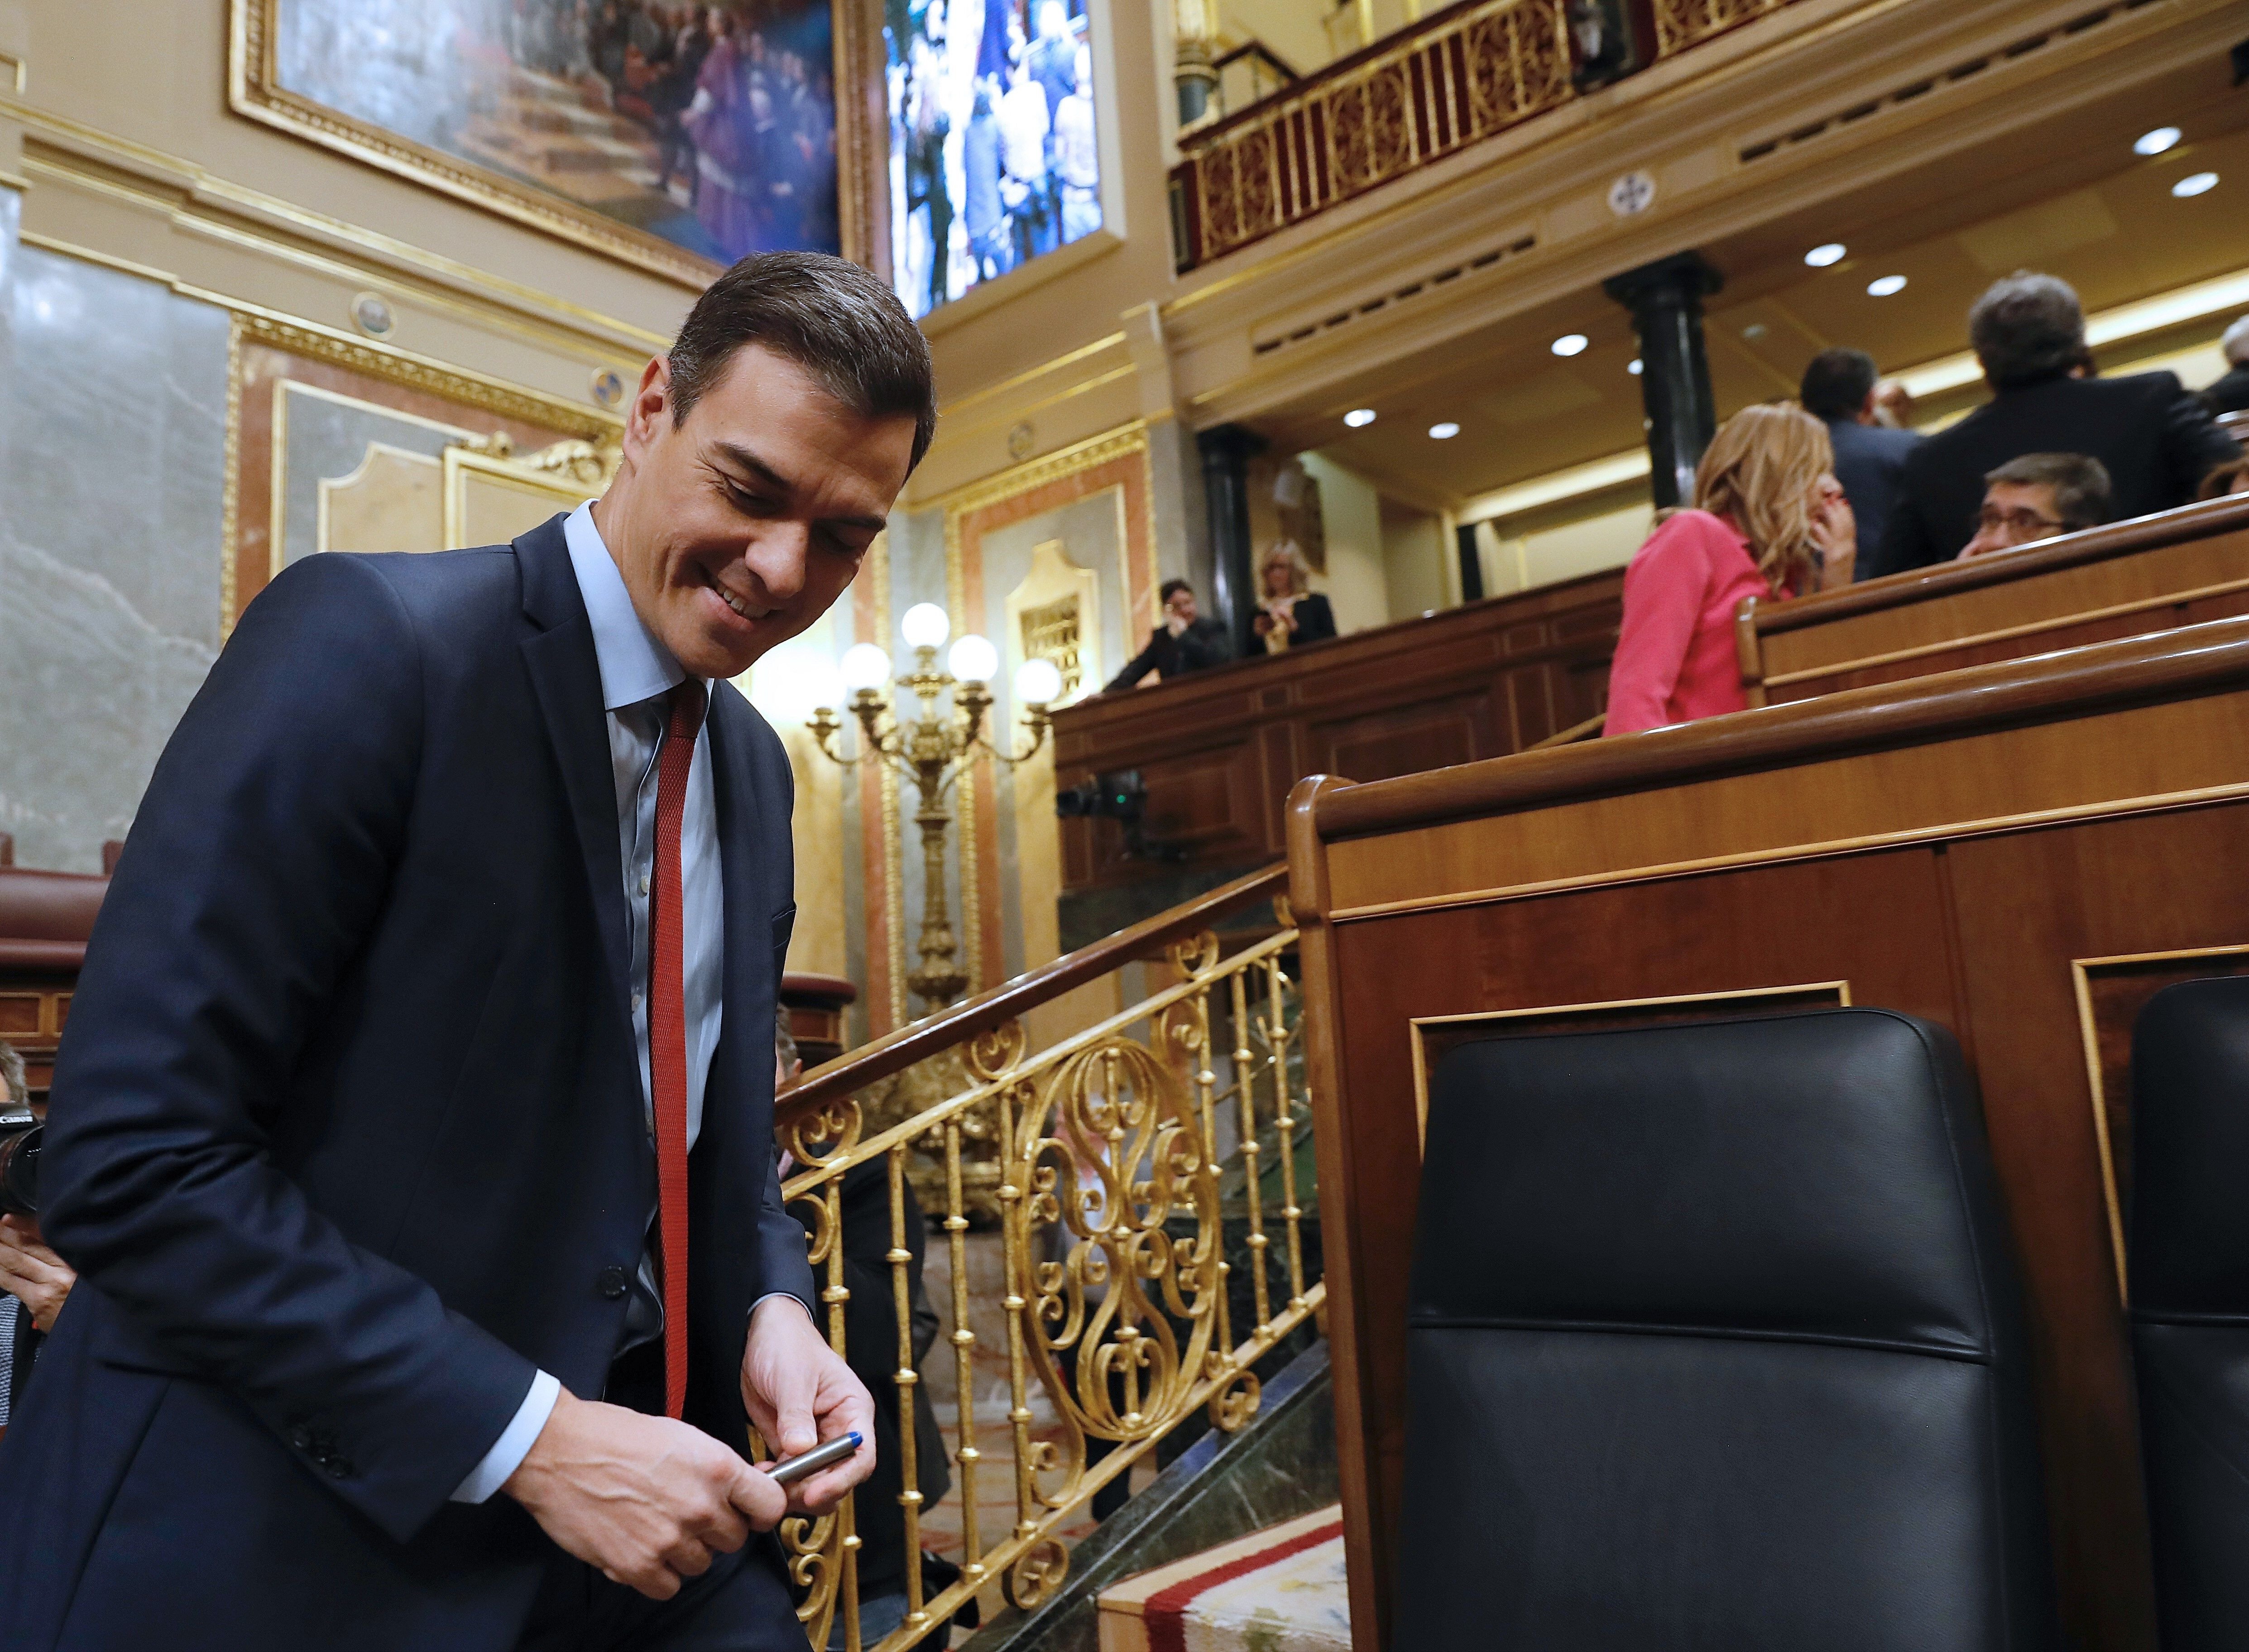 Pedro Sánchez threatens Catalonia with direct rule again, if it acts unilaterally